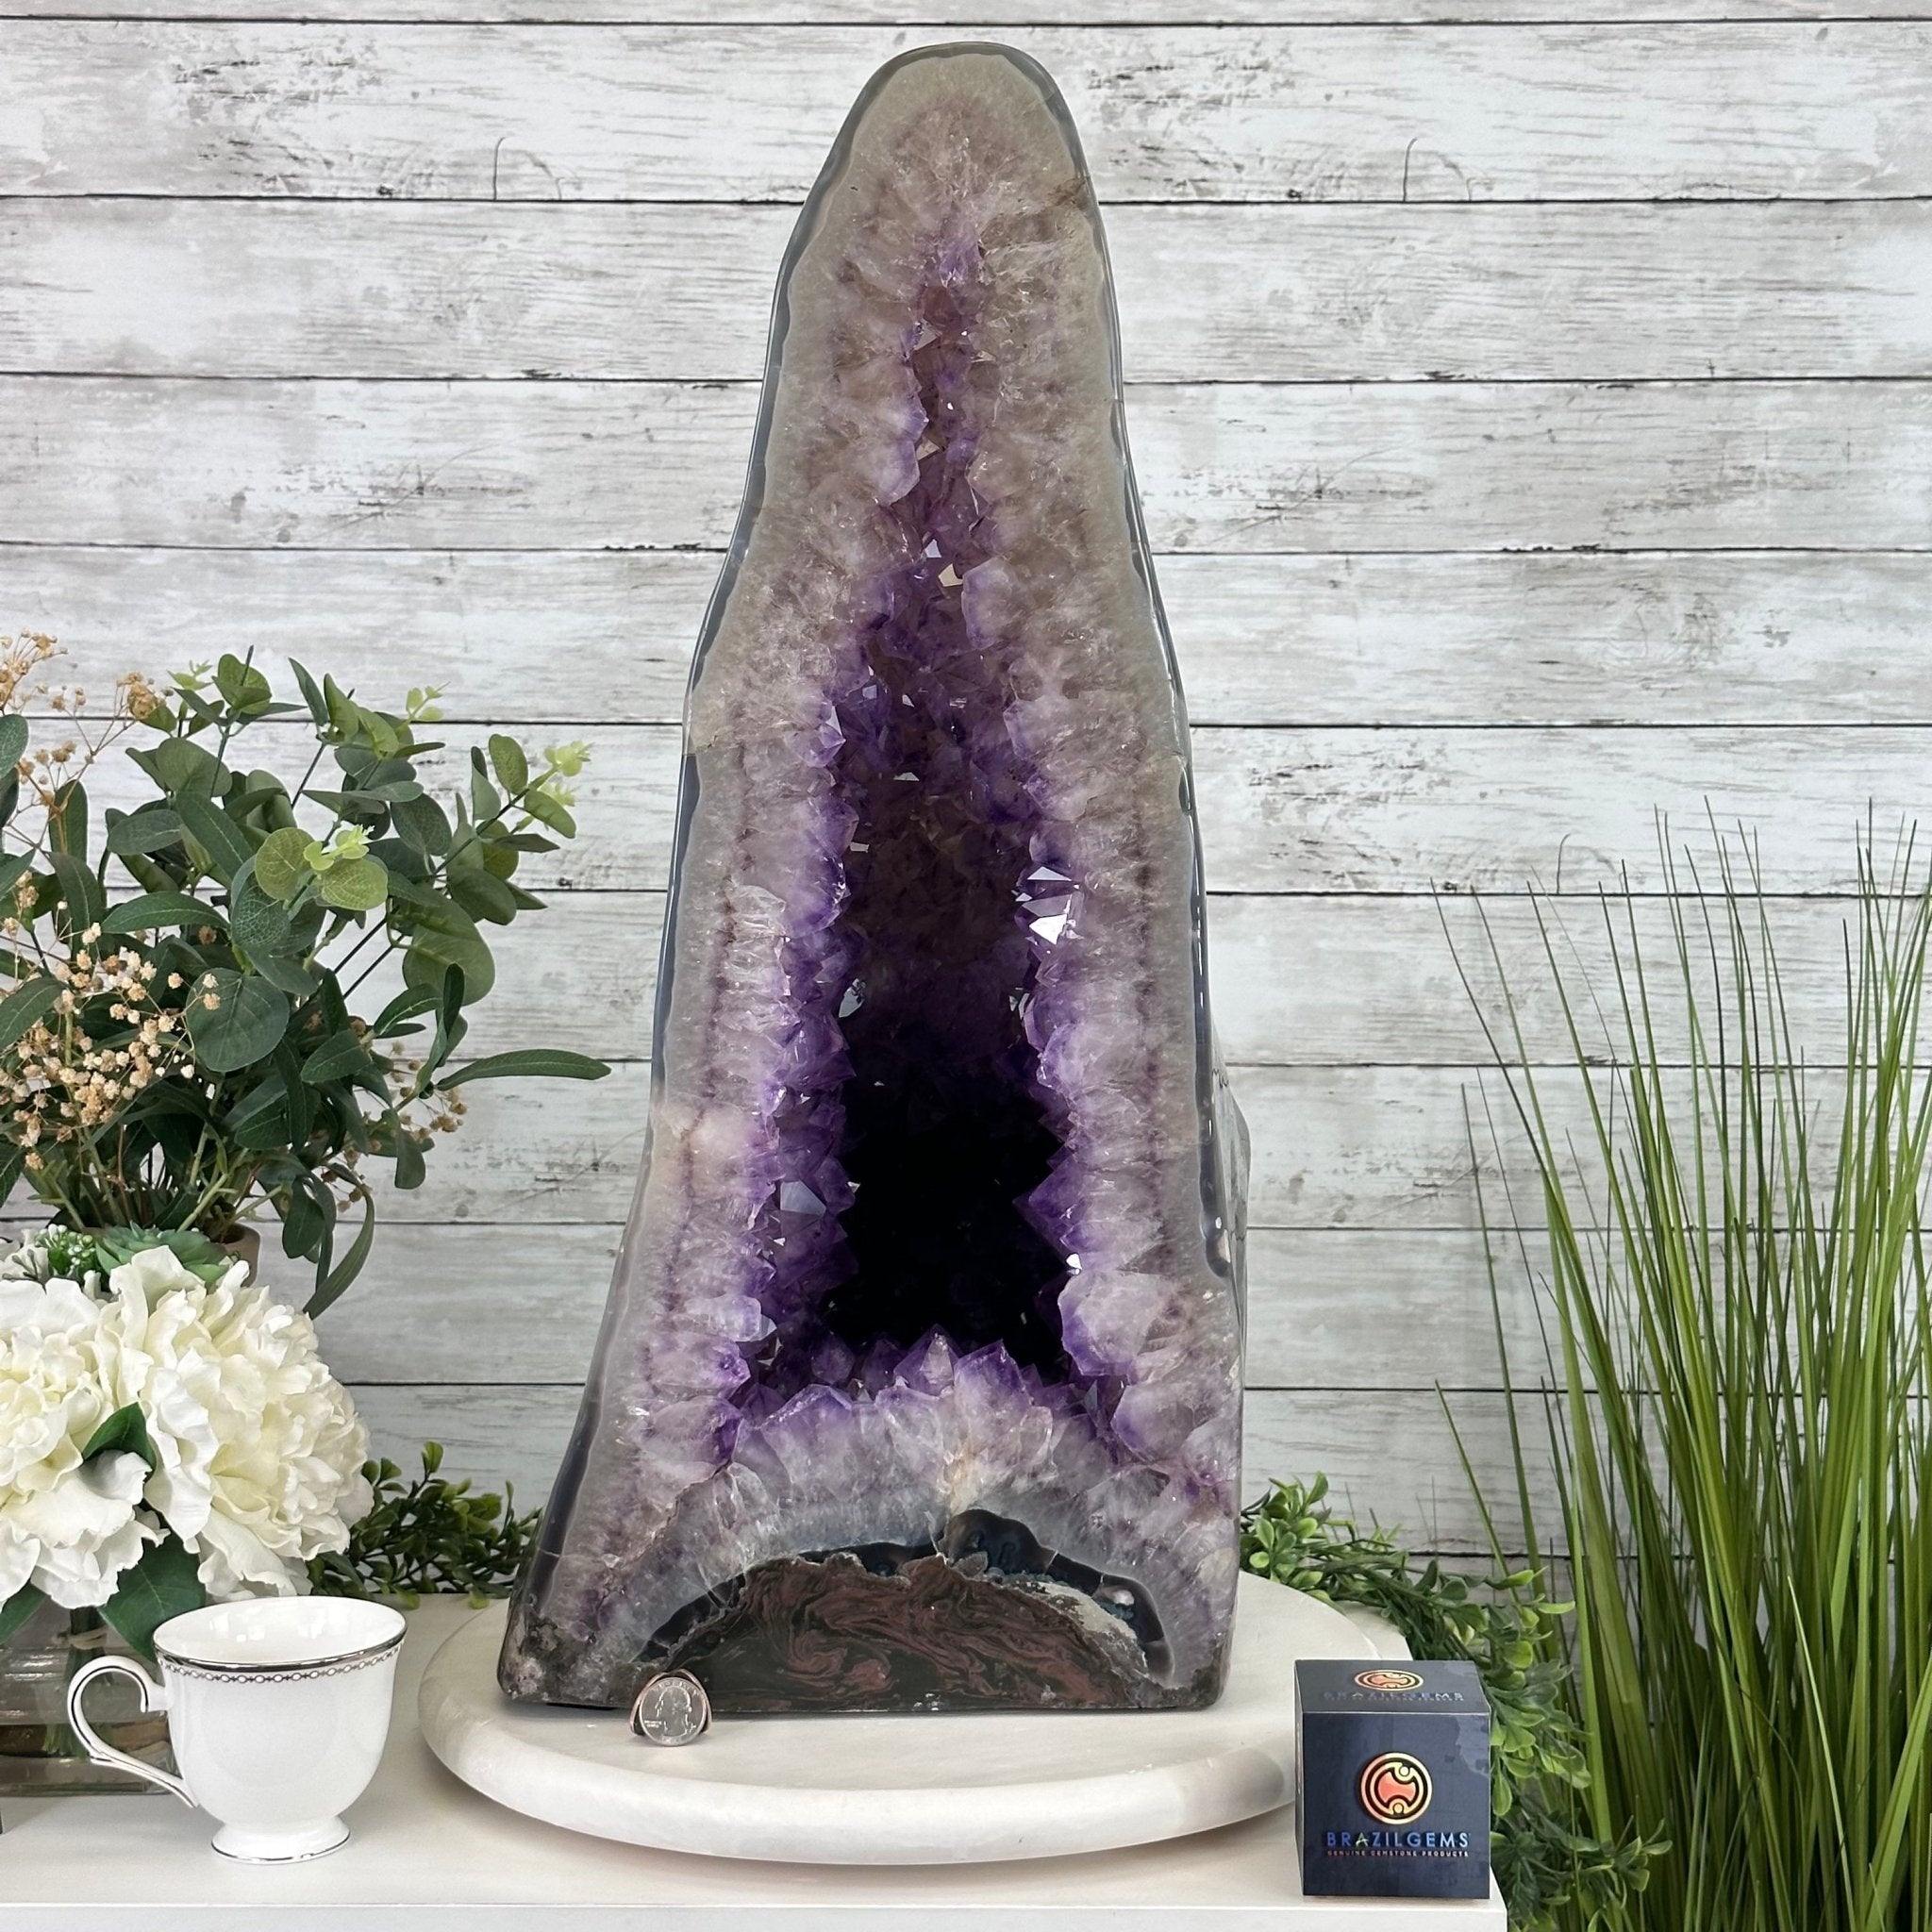 Extra Quality Polished Brazilian Amethyst Cathedral, 82.5 lbs & 23.6" tall Model #5602-0027 by Brazil Gems - Brazil GemsBrazil GemsExtra Quality Polished Brazilian Amethyst Cathedral, 82.5 lbs & 23.6" tall Model #5602-0027 by Brazil GemsPolished Cathedrals5602-0027